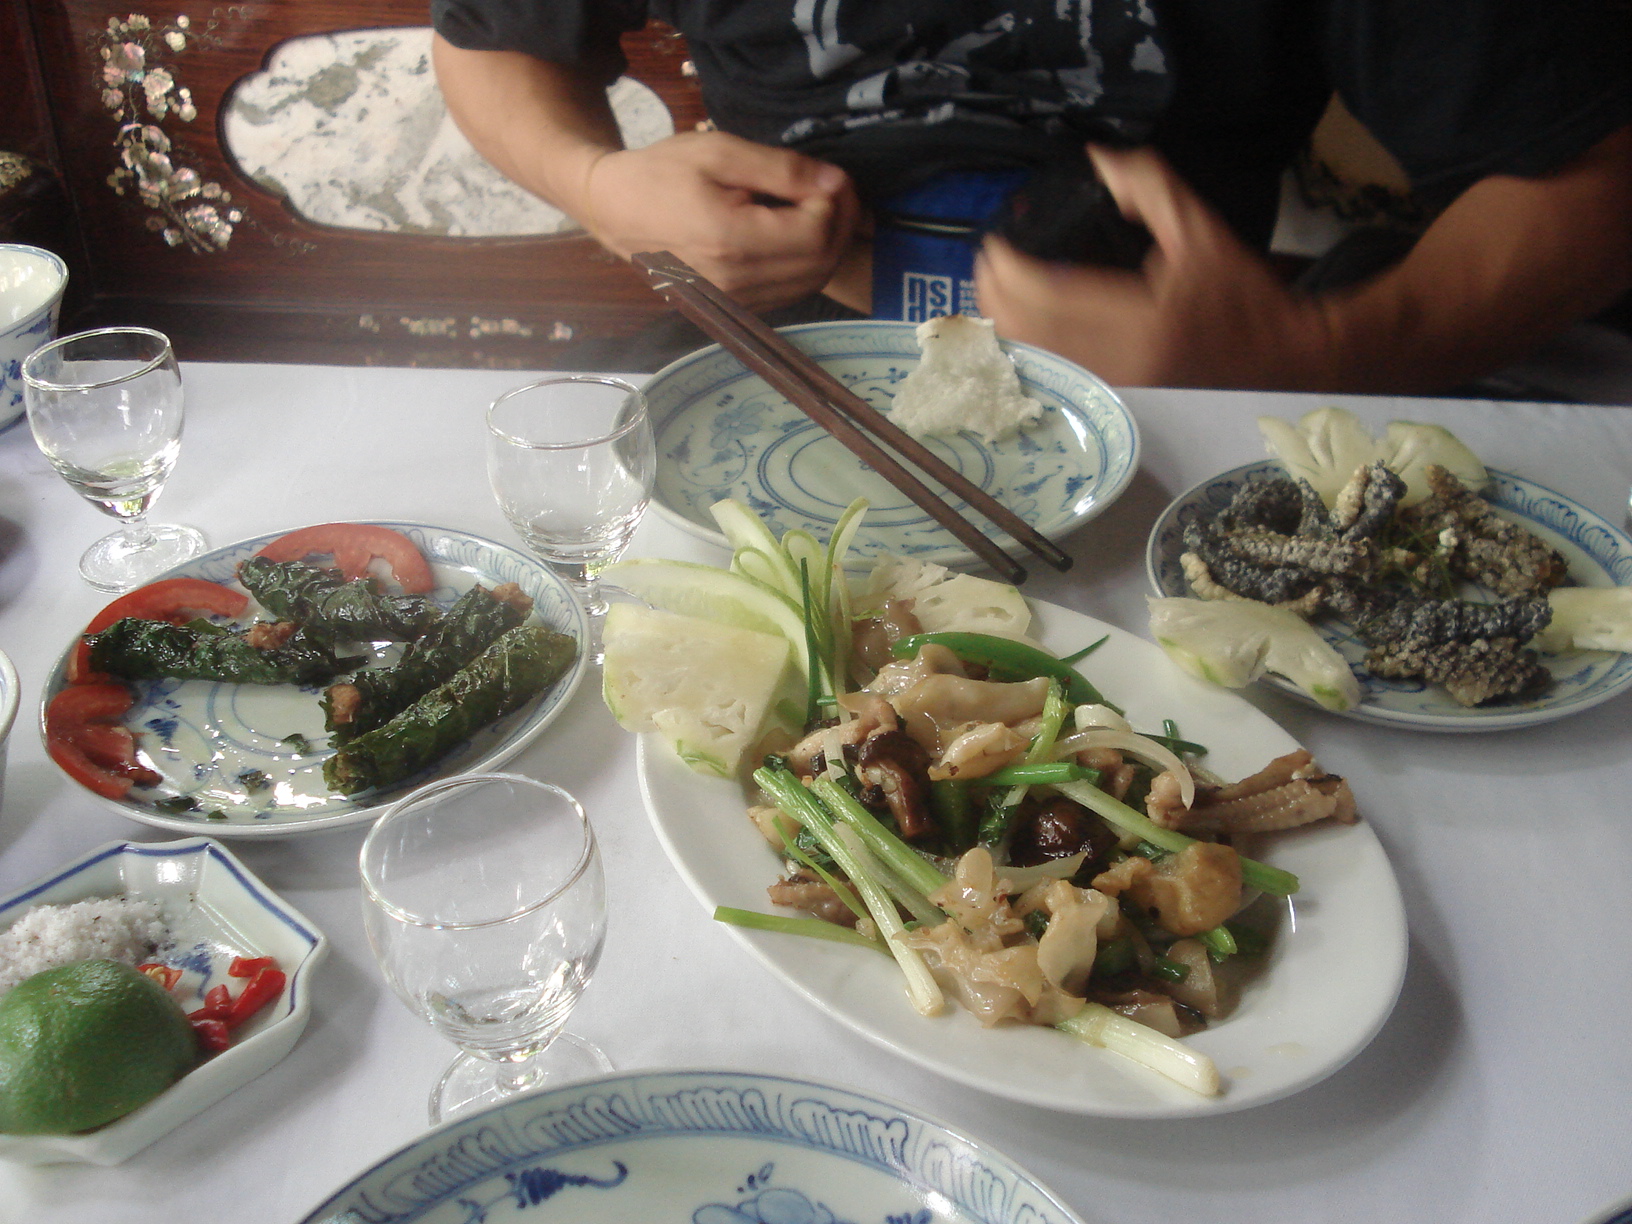 The Craziest Thing To Eat in Hanoi: A visit to Le Mat, Hanoi's Snake Village, where snake is featured on every plate!